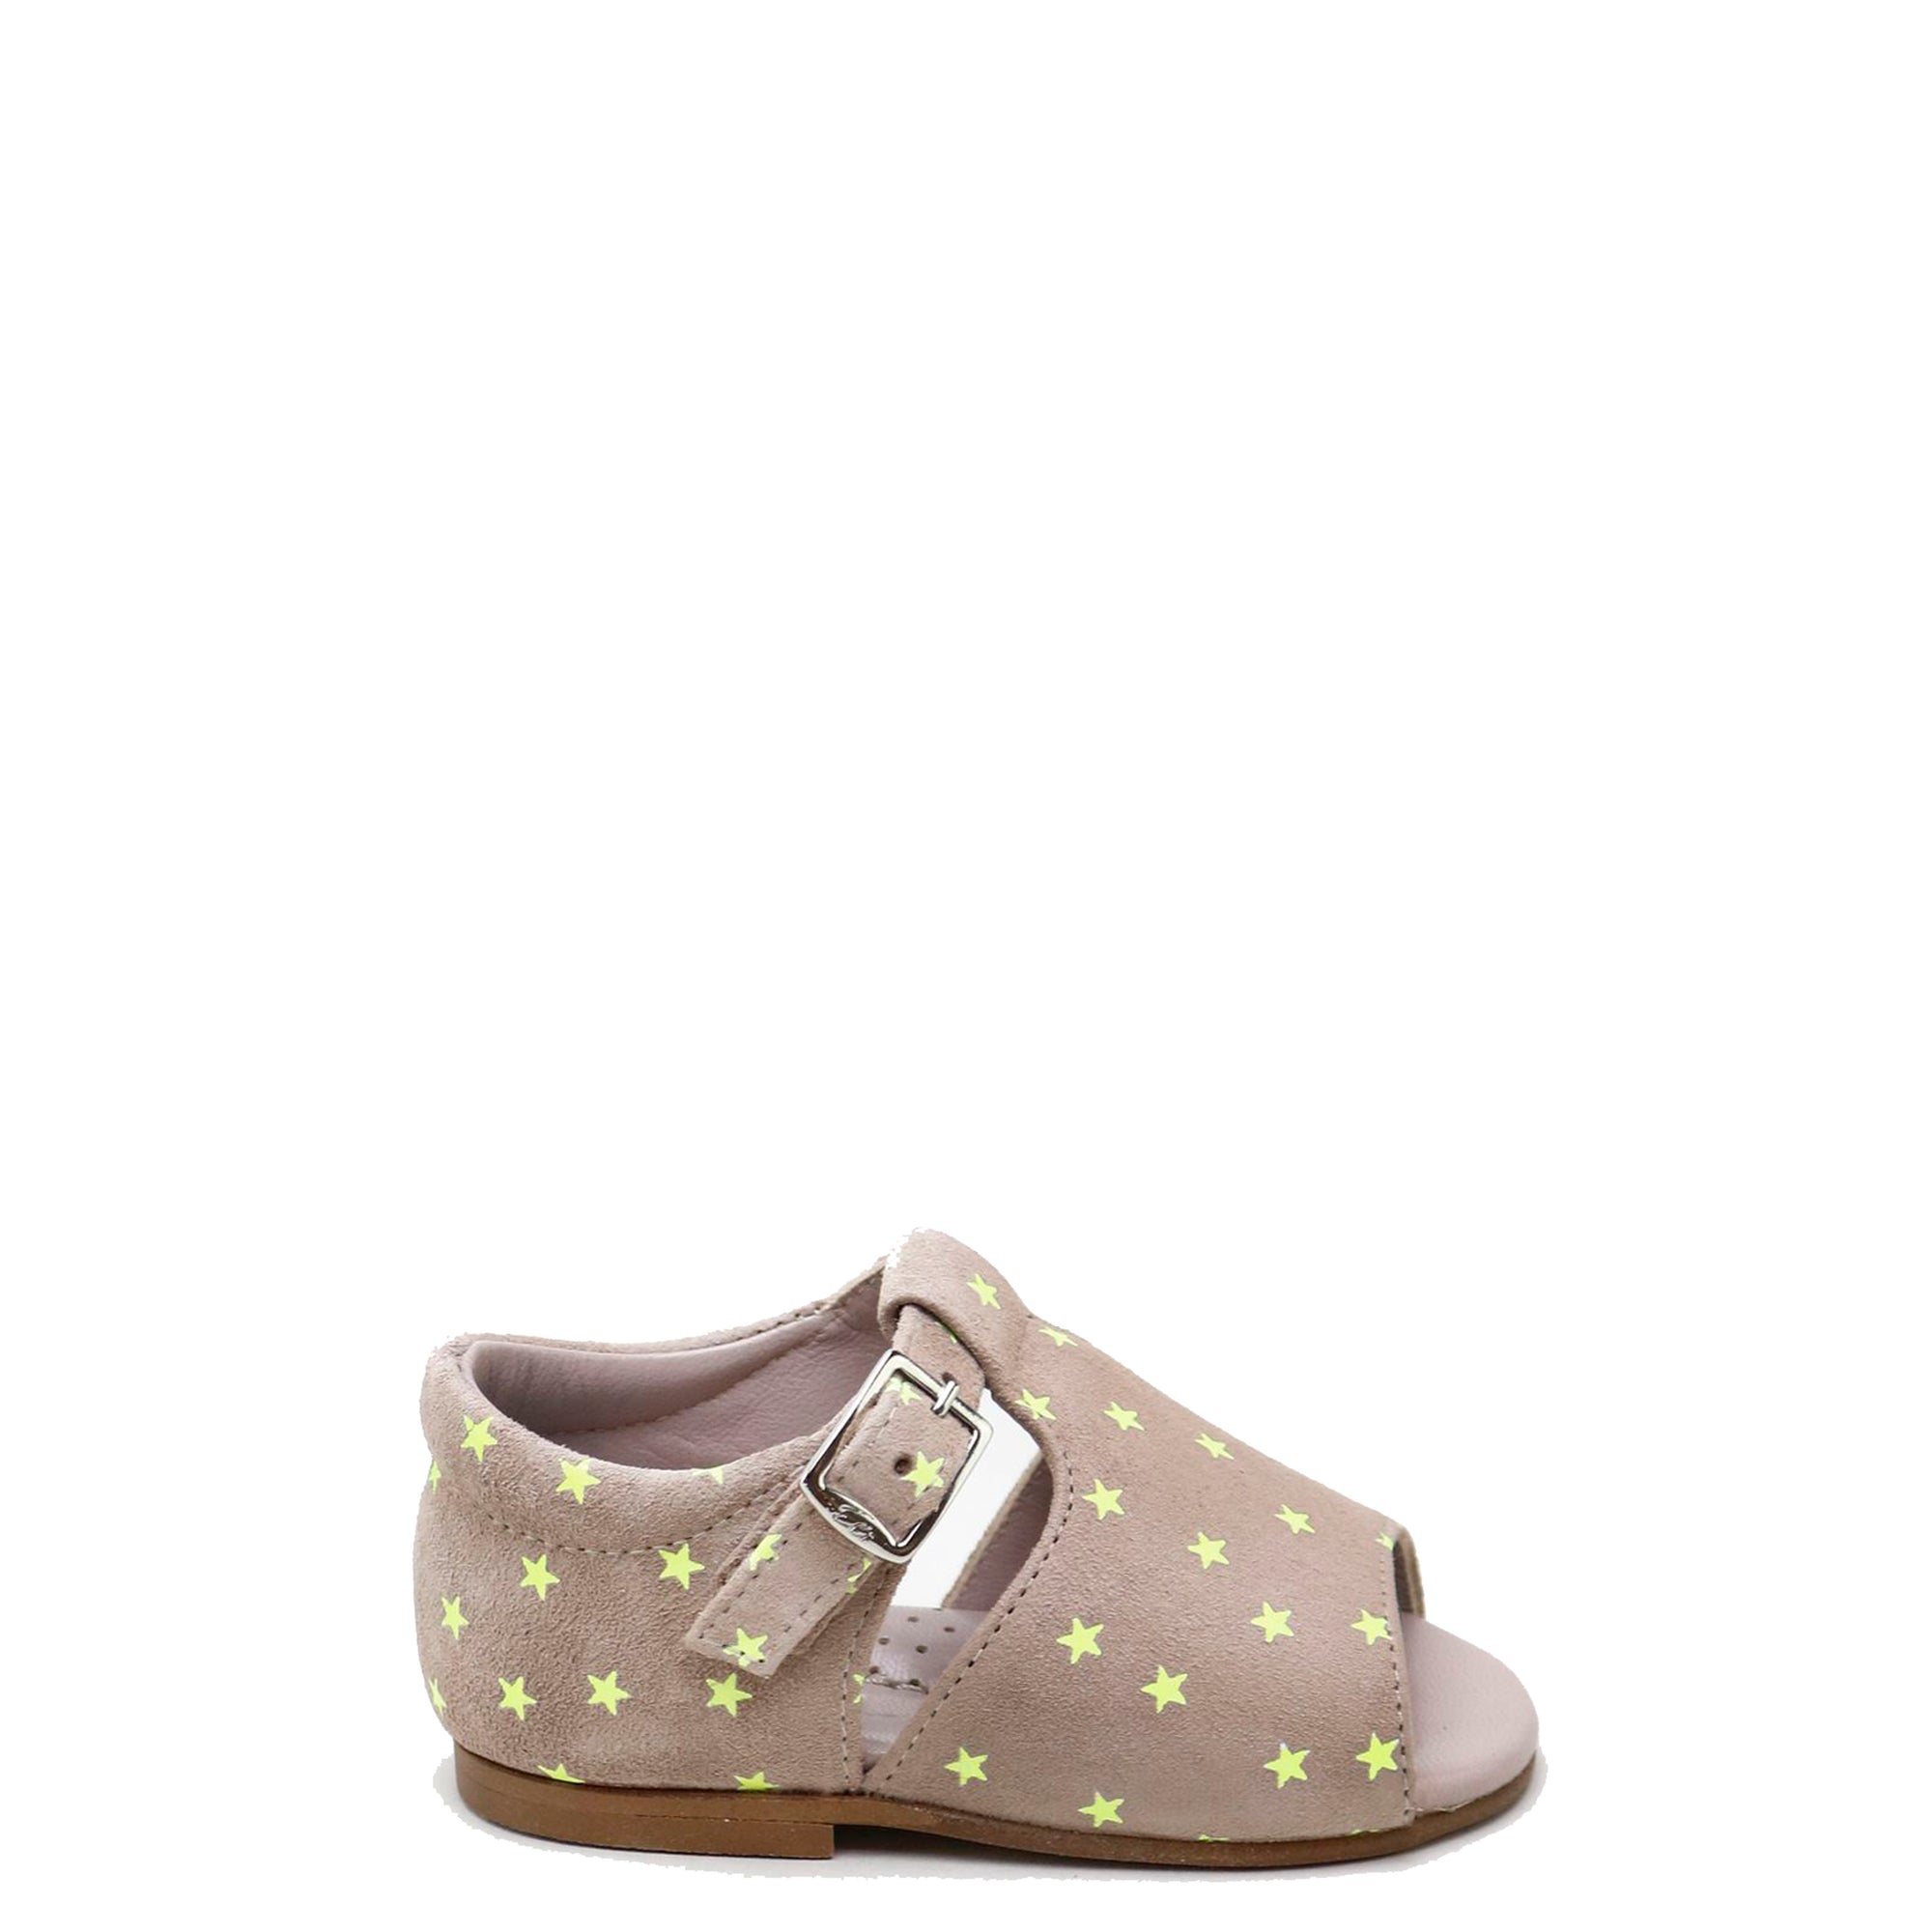 Papanatas Taupe and Neon Star Baby Sandal-Tassel Children Shoes